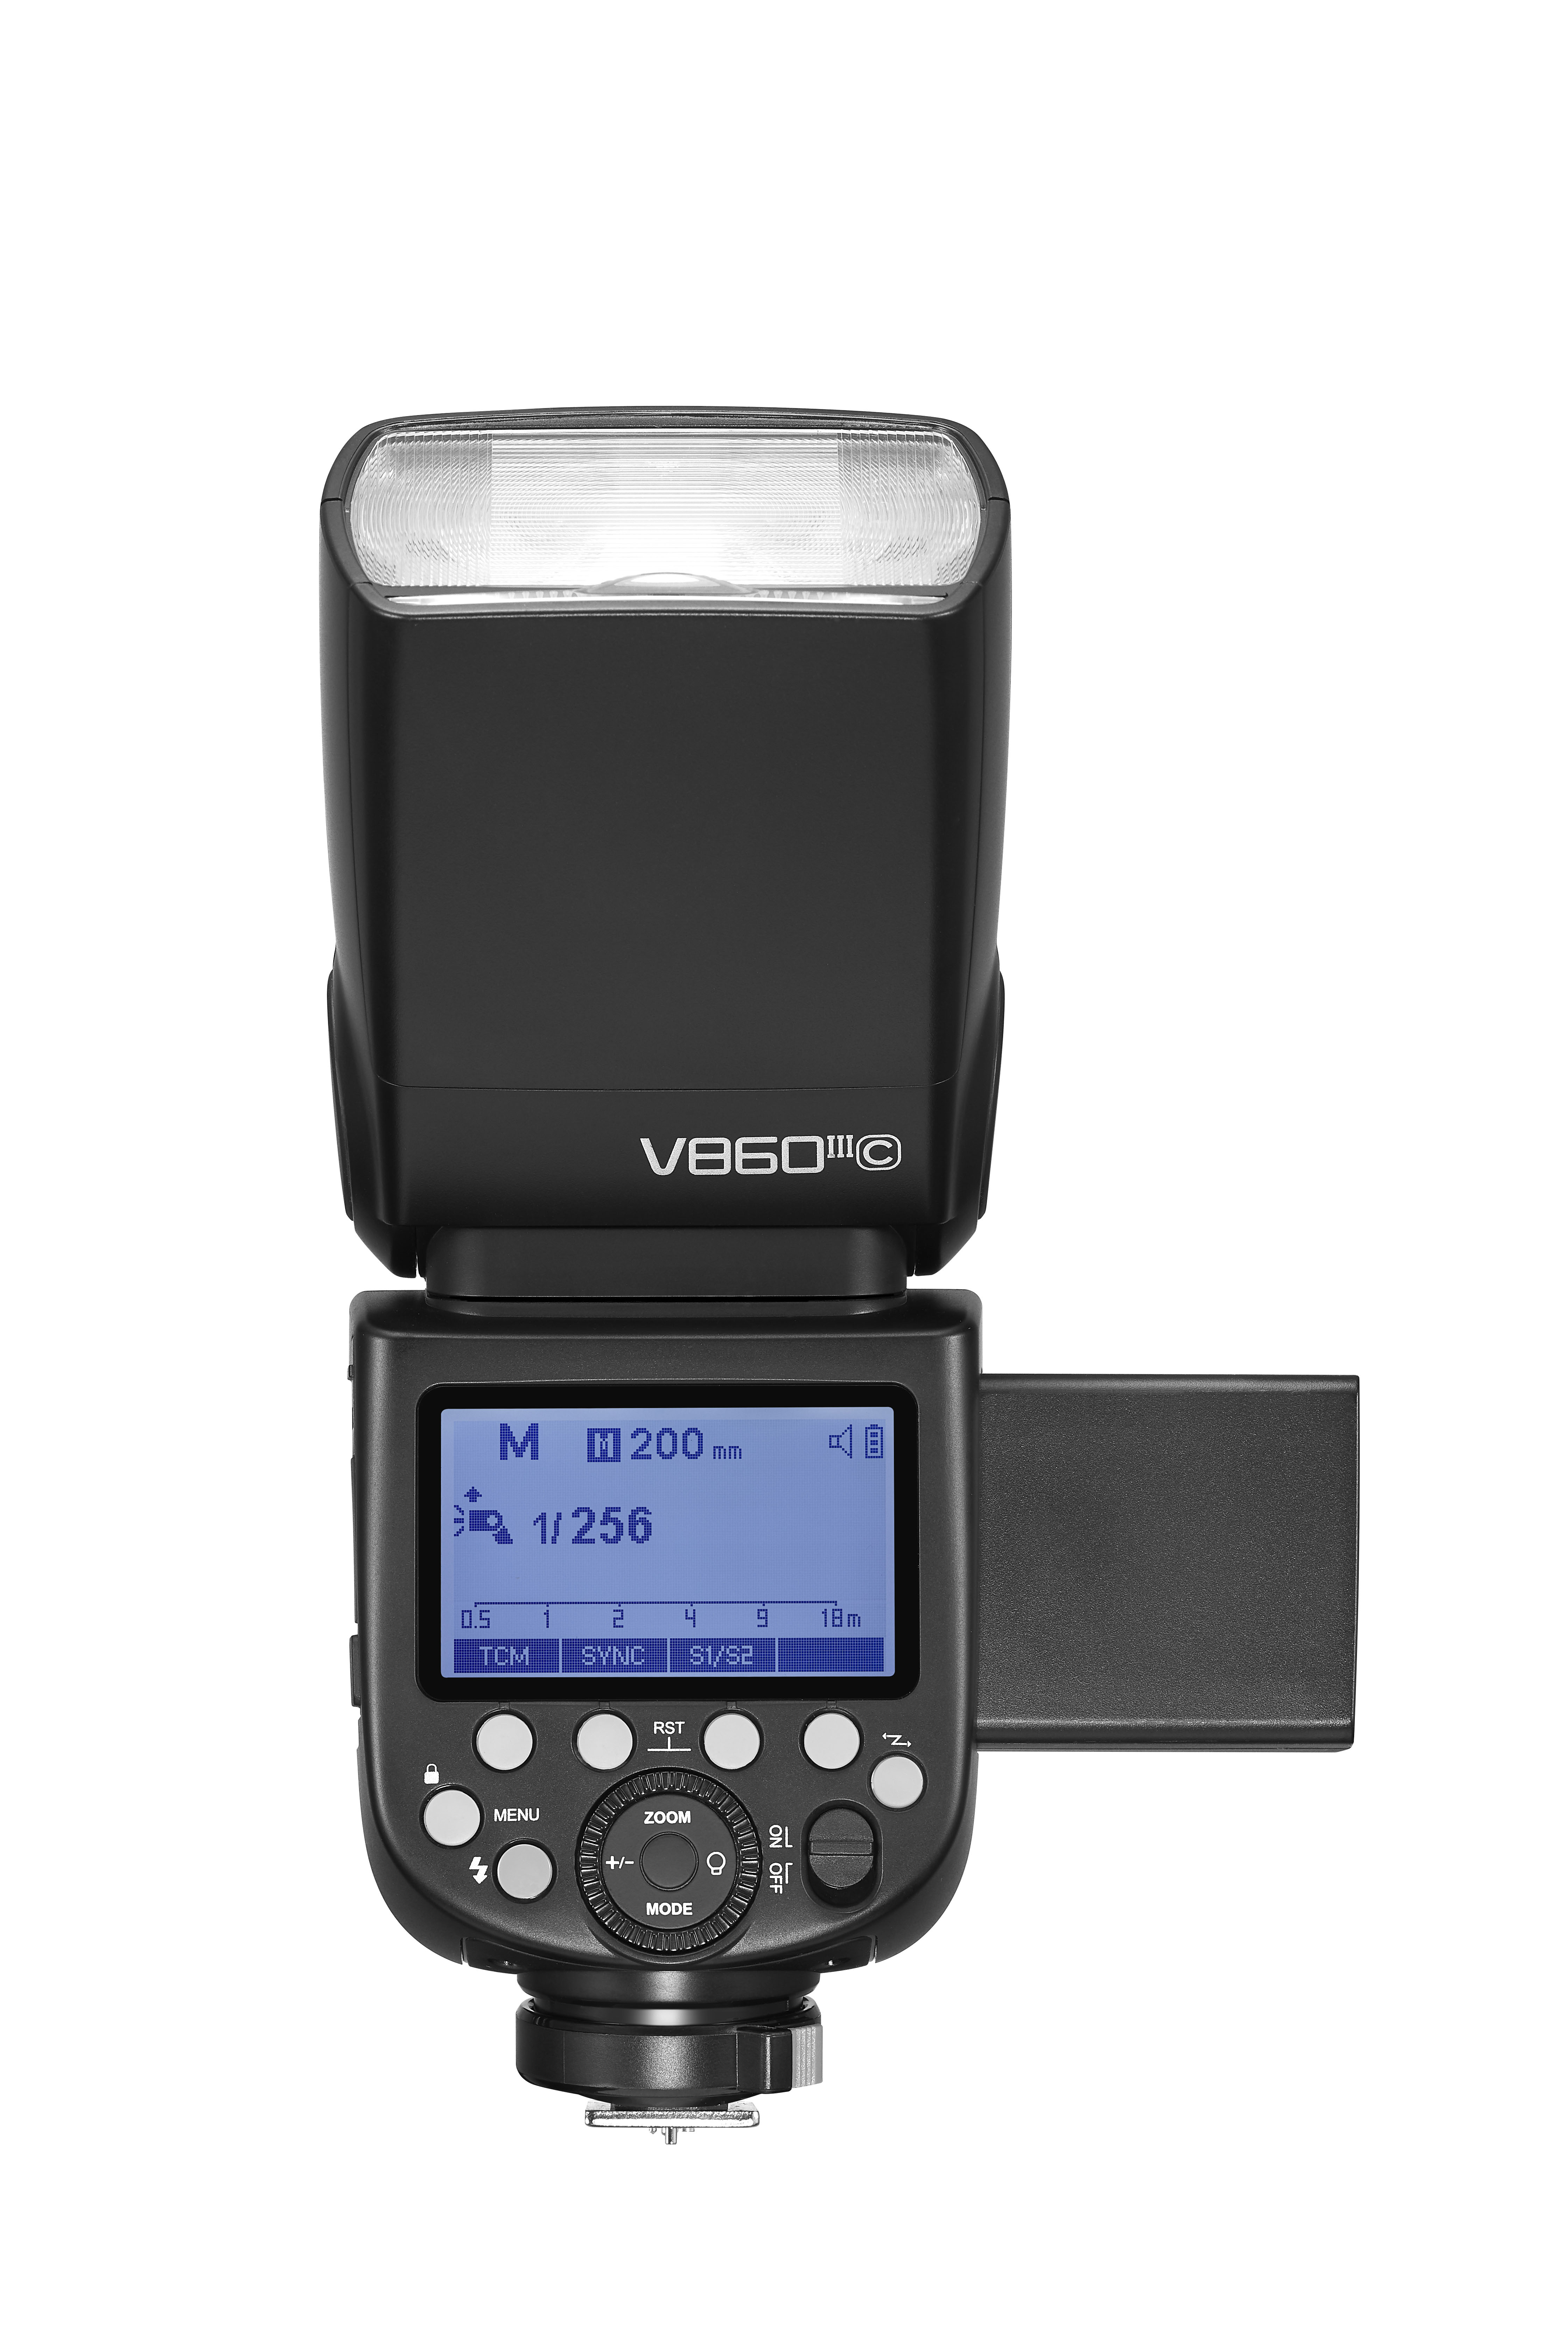 Battery : Godox V860III with battery out